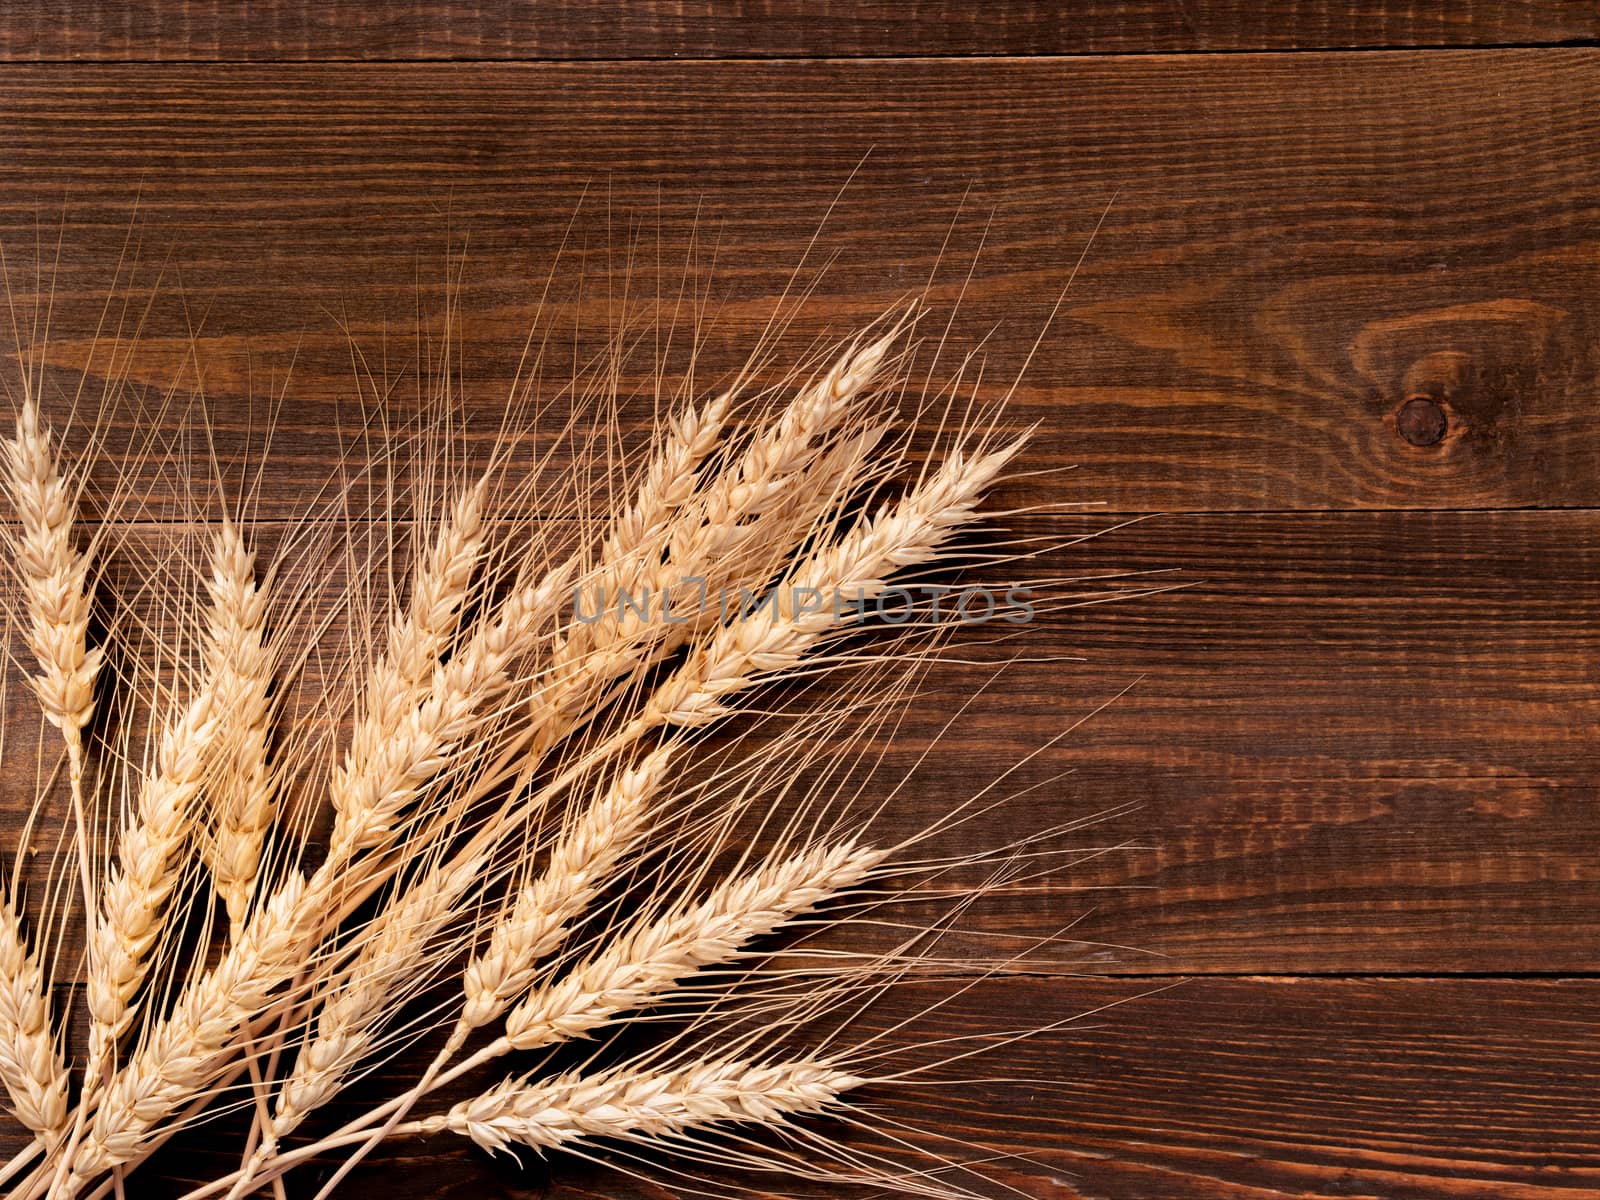 Spikelets of wheat on wooden background by fascinadora